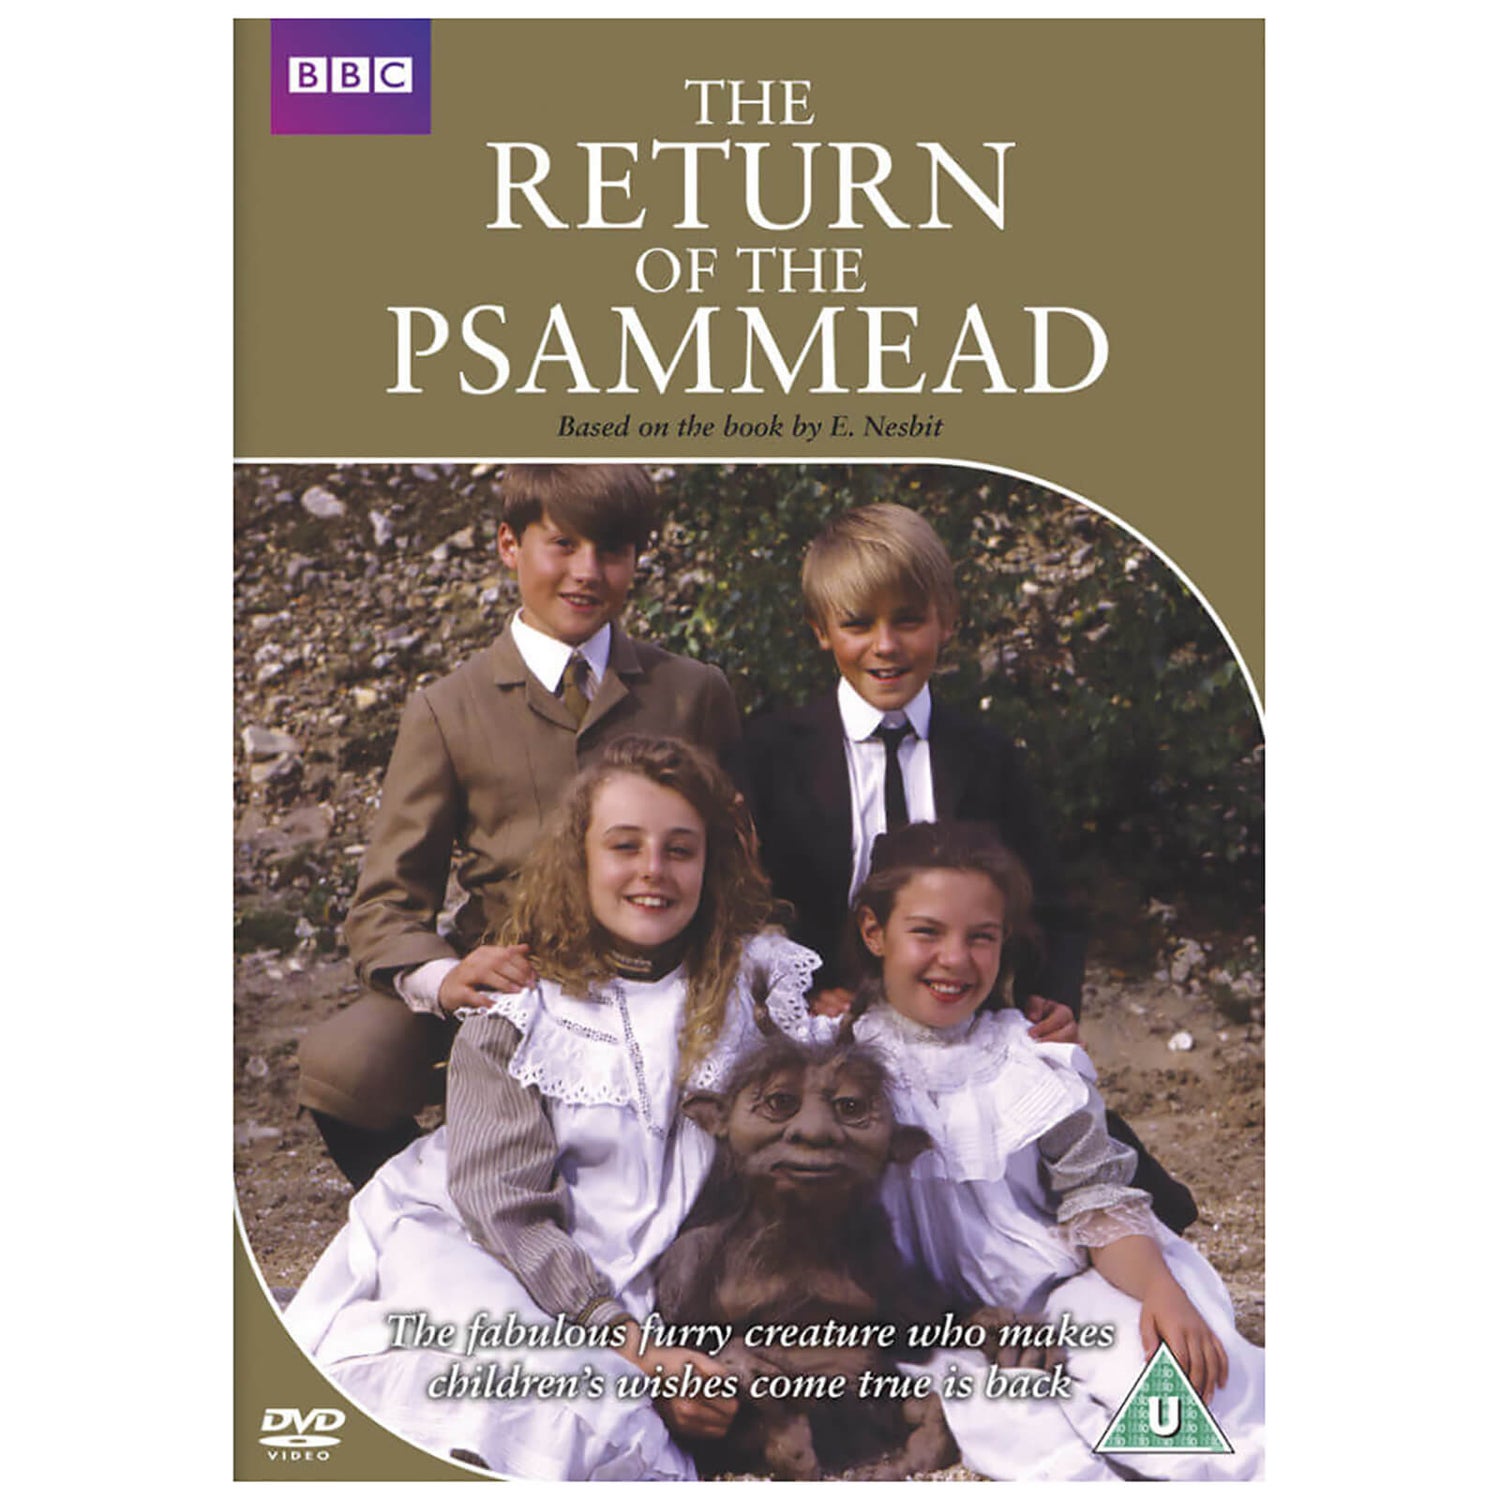 The Return of Psammead